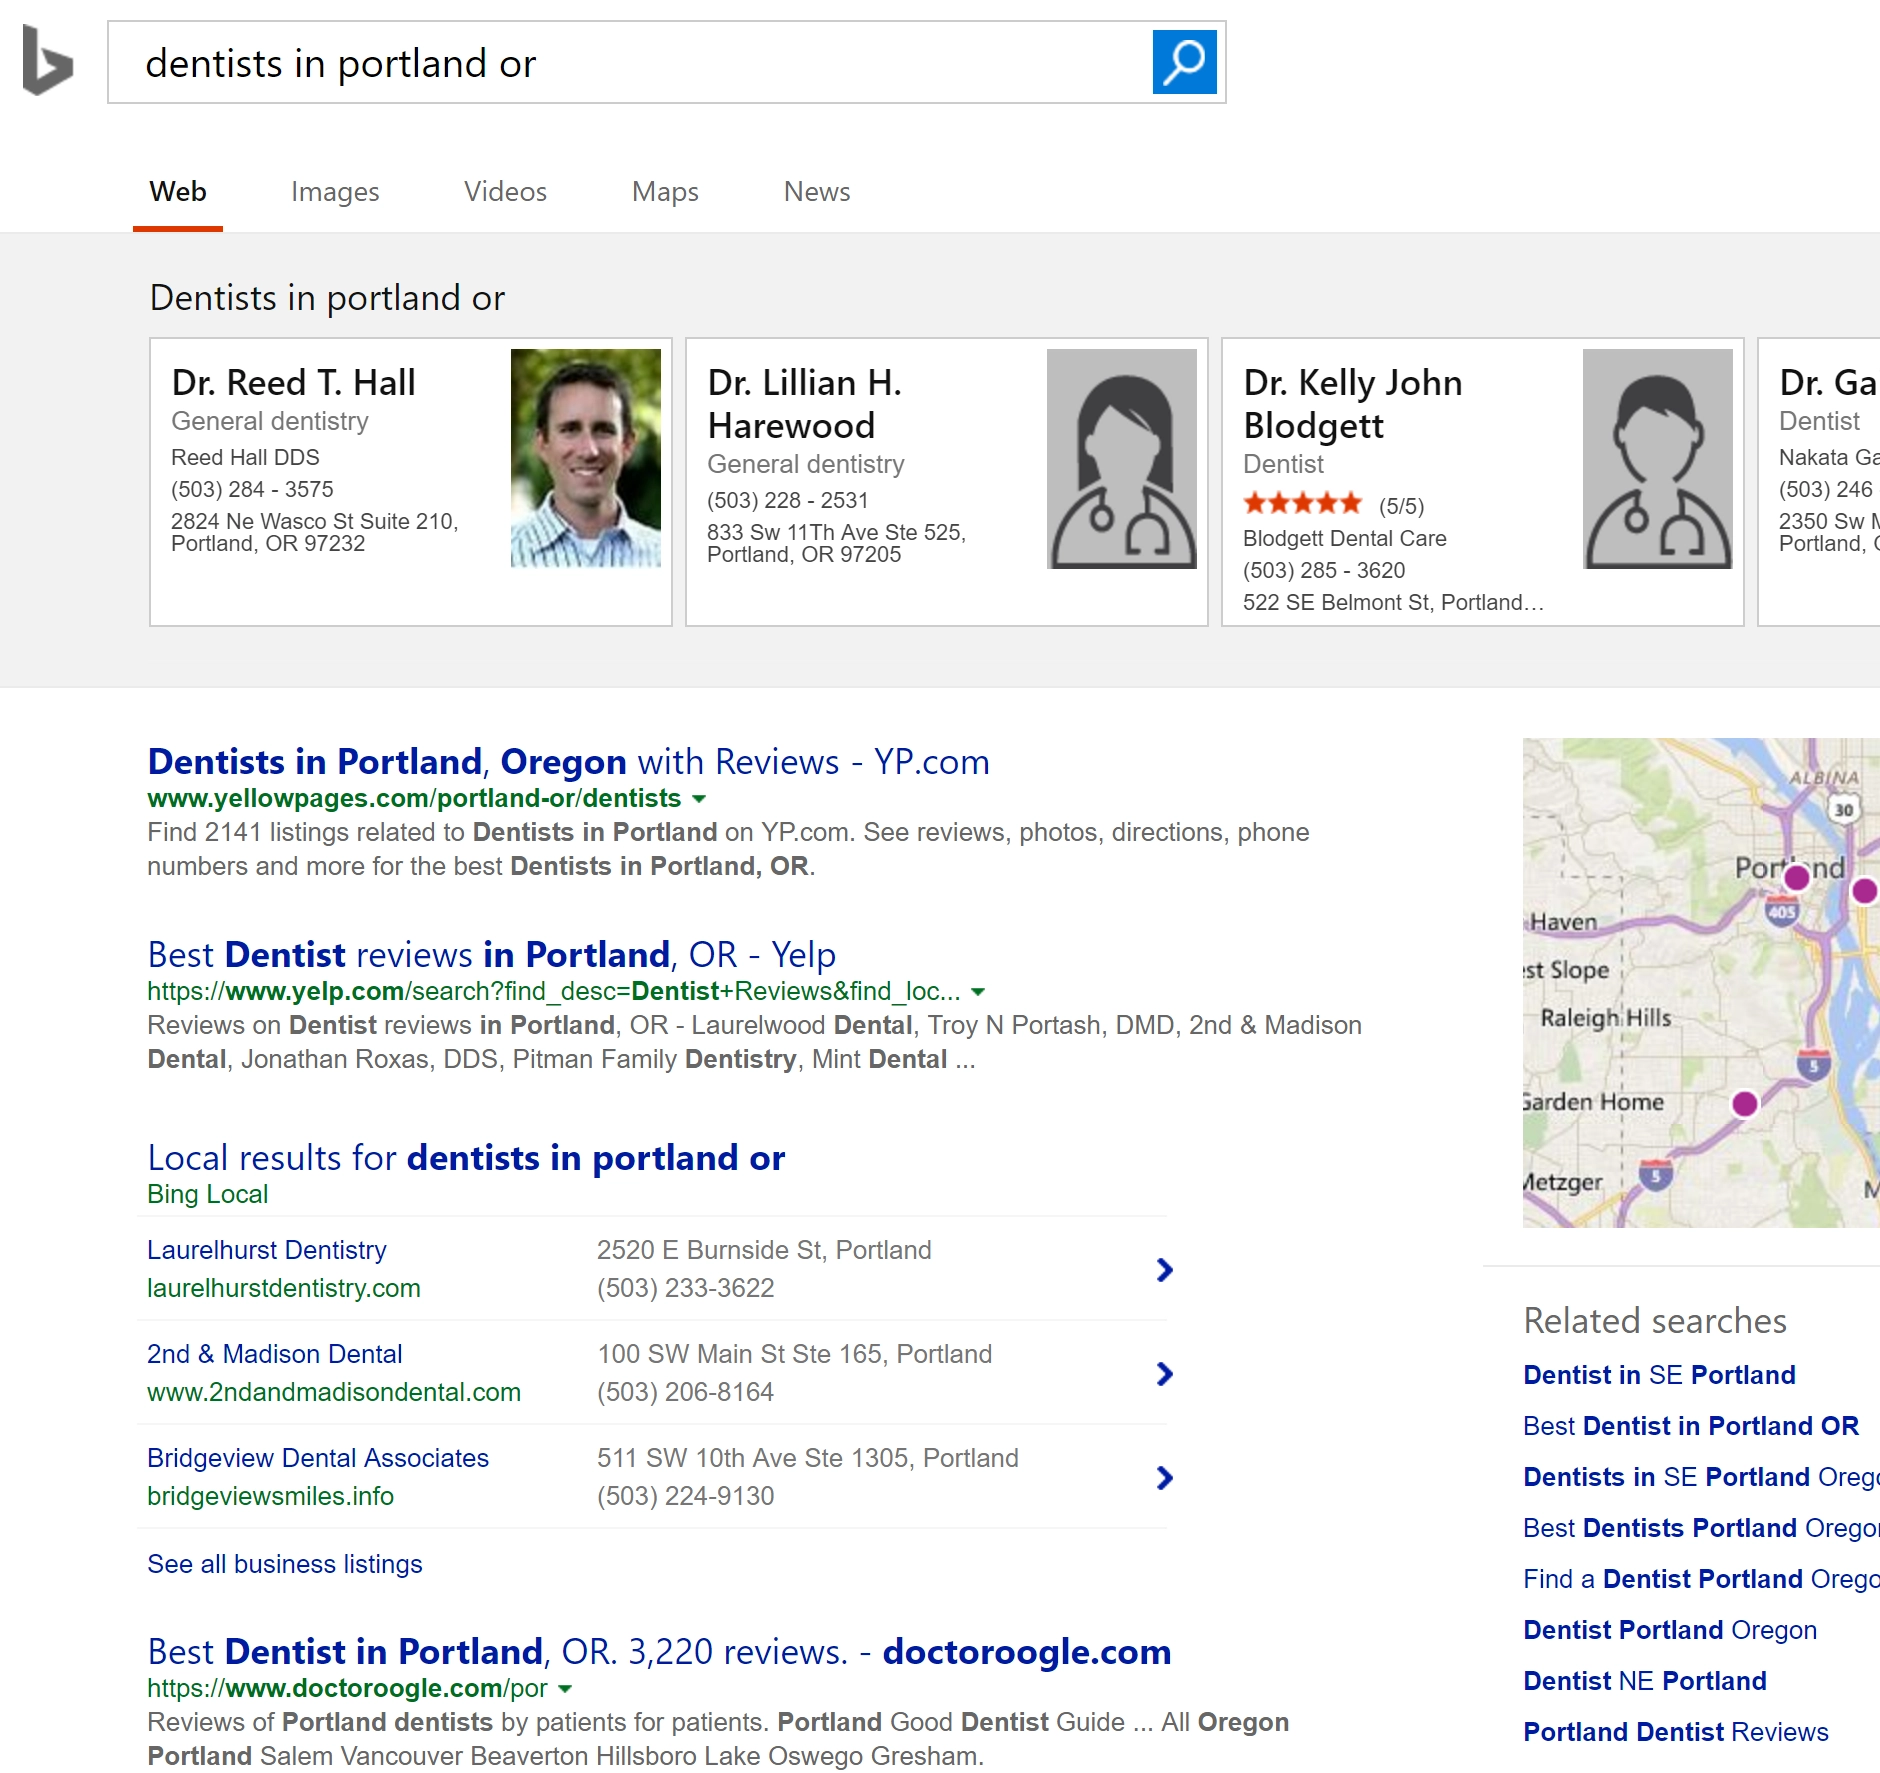 Bing carousel for Dentists in Portland query